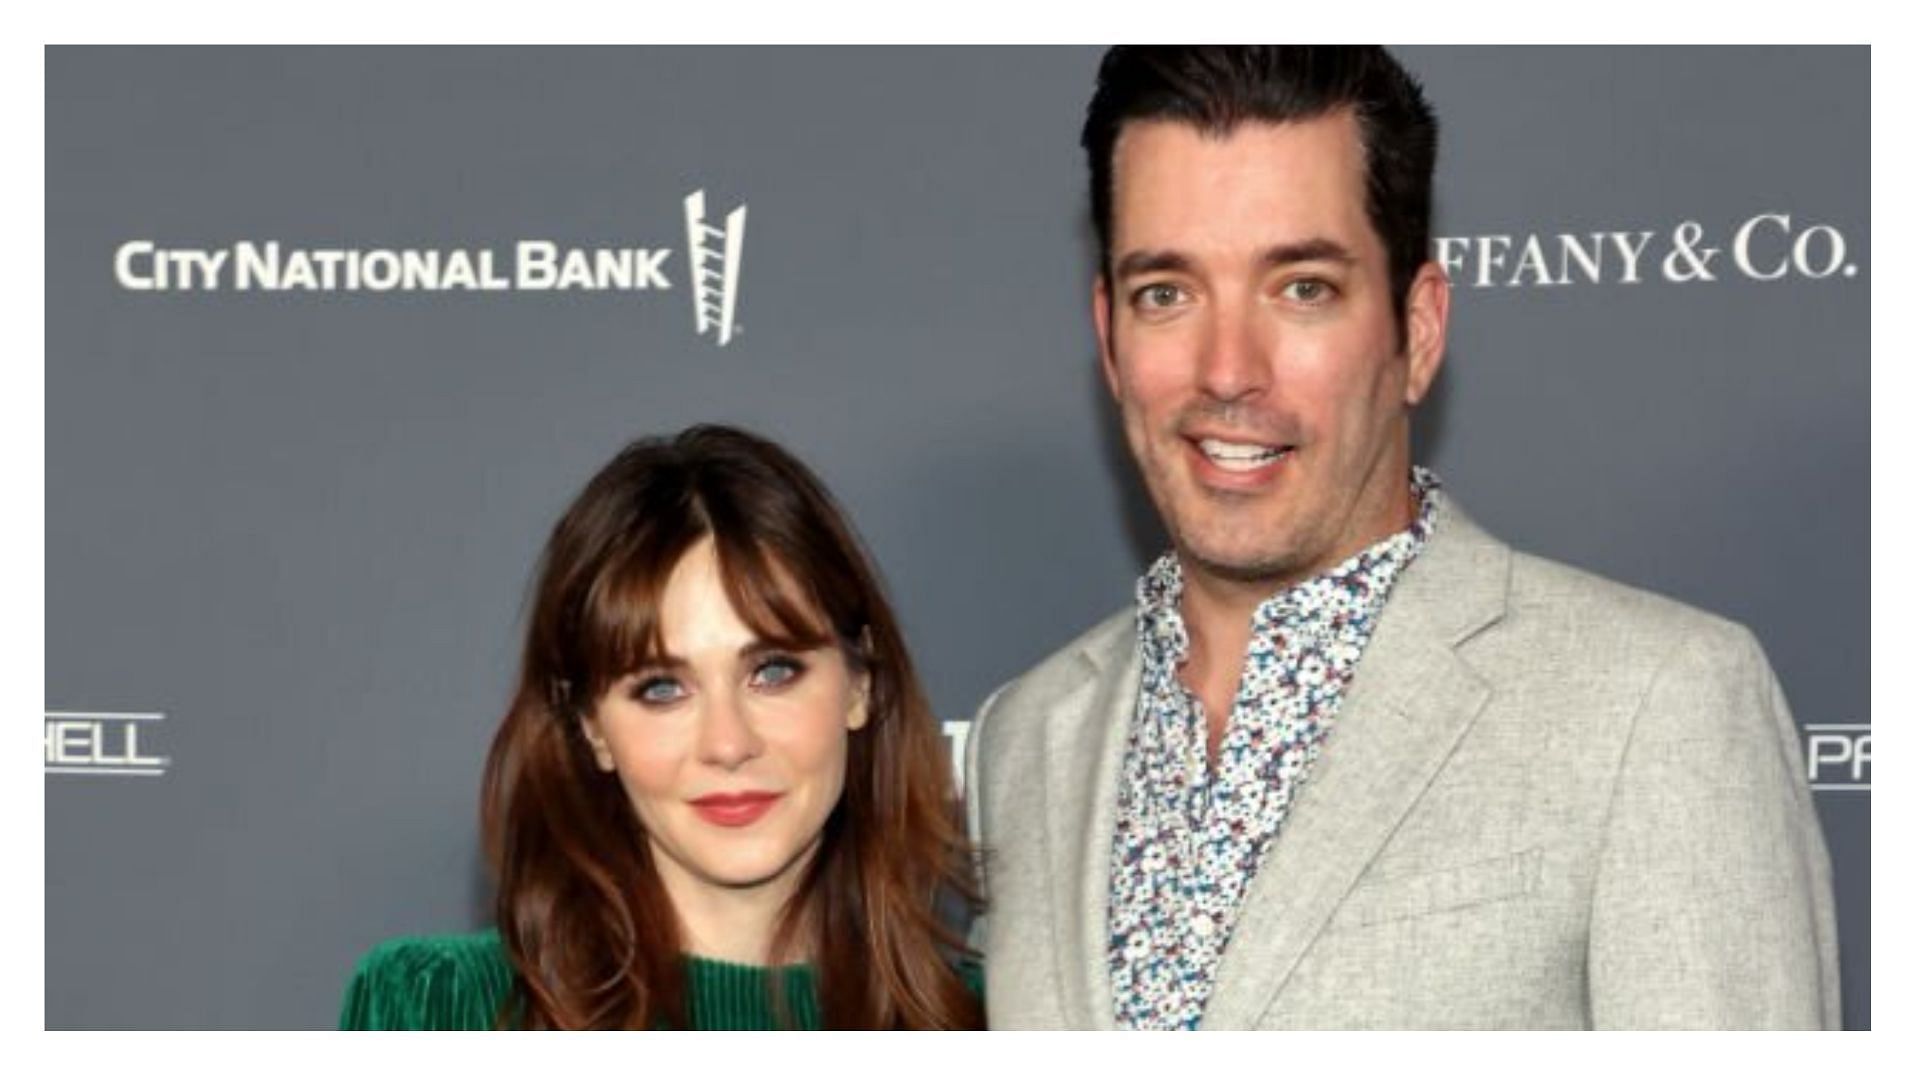 Zooey Deschanel and Jonathan Scott were romantically linked in 2019 (Image via Amy Sussman/Getty Images)